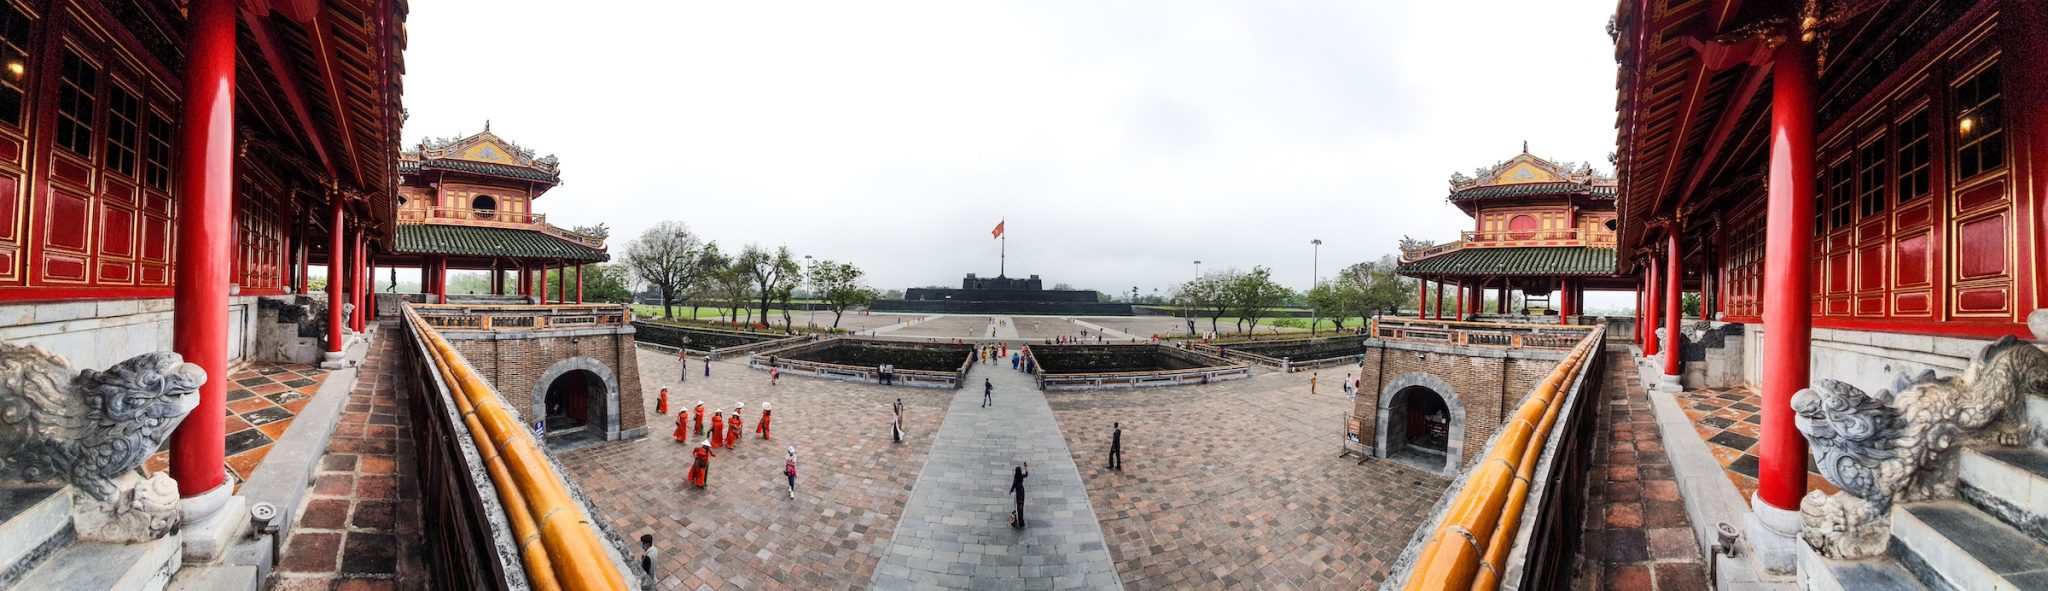 Hue Imperial City Panorama